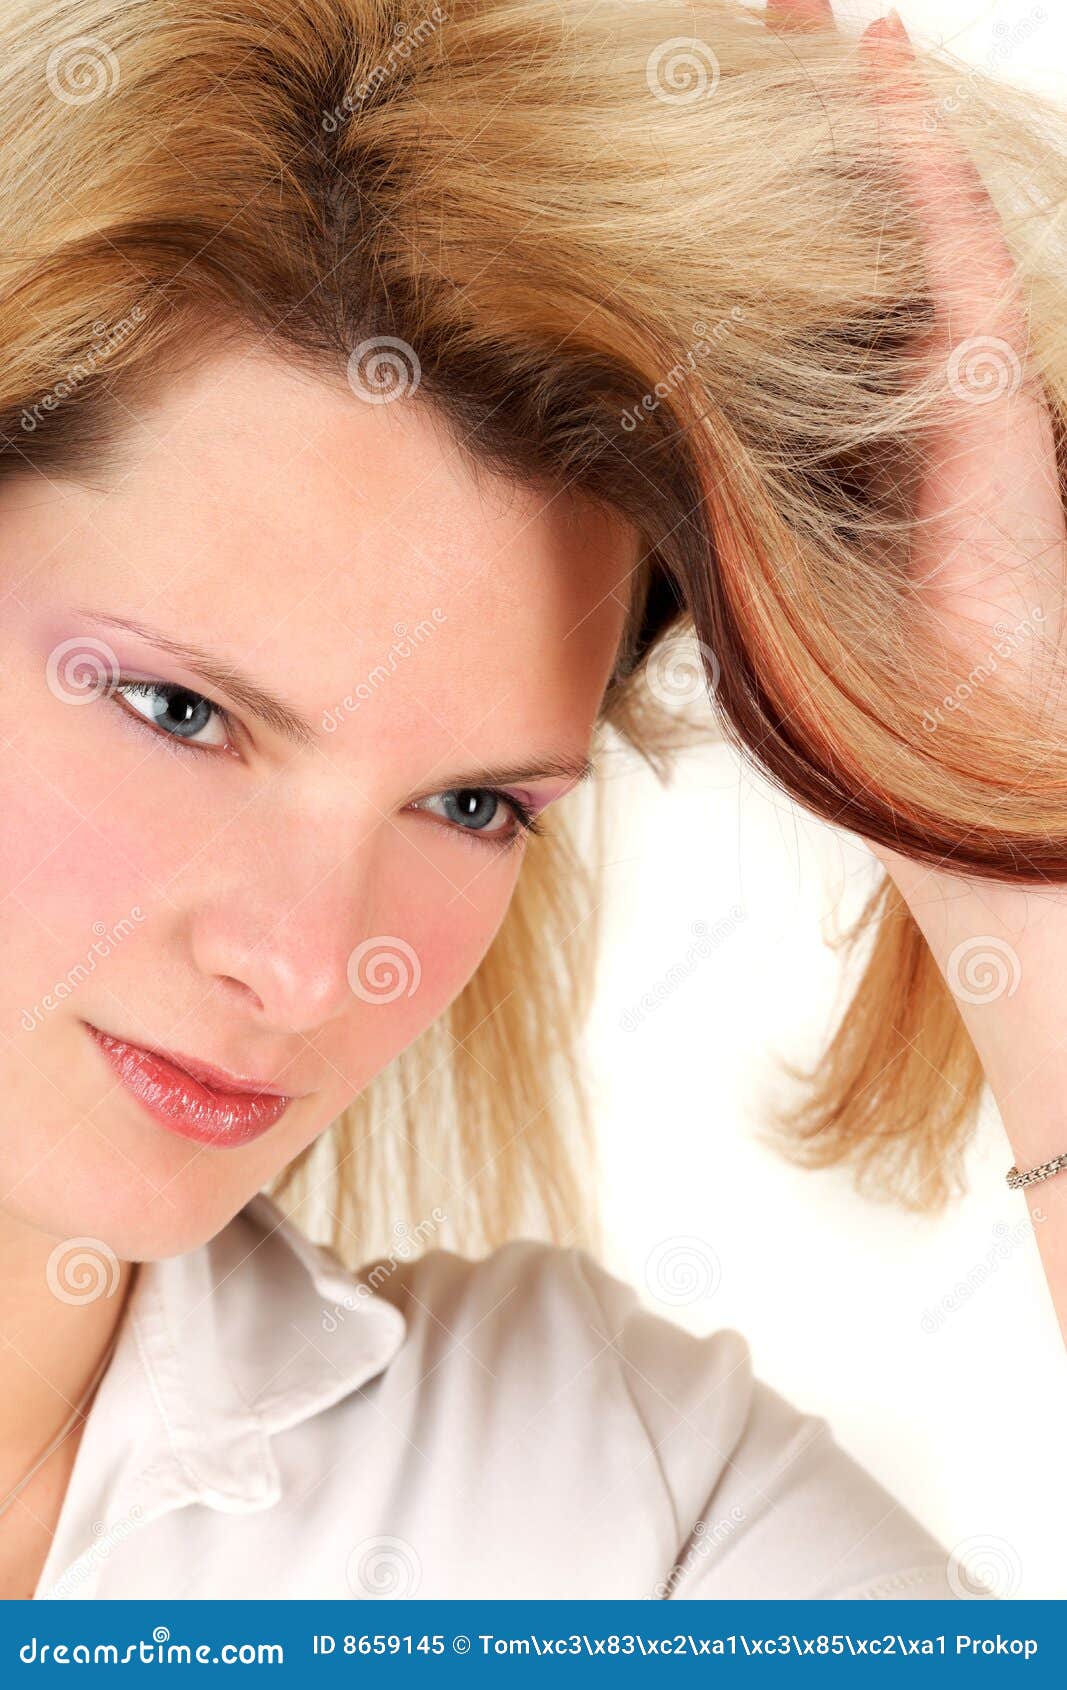 Young Woman is Editing Her Hairstyle Stock Image - Image of looking